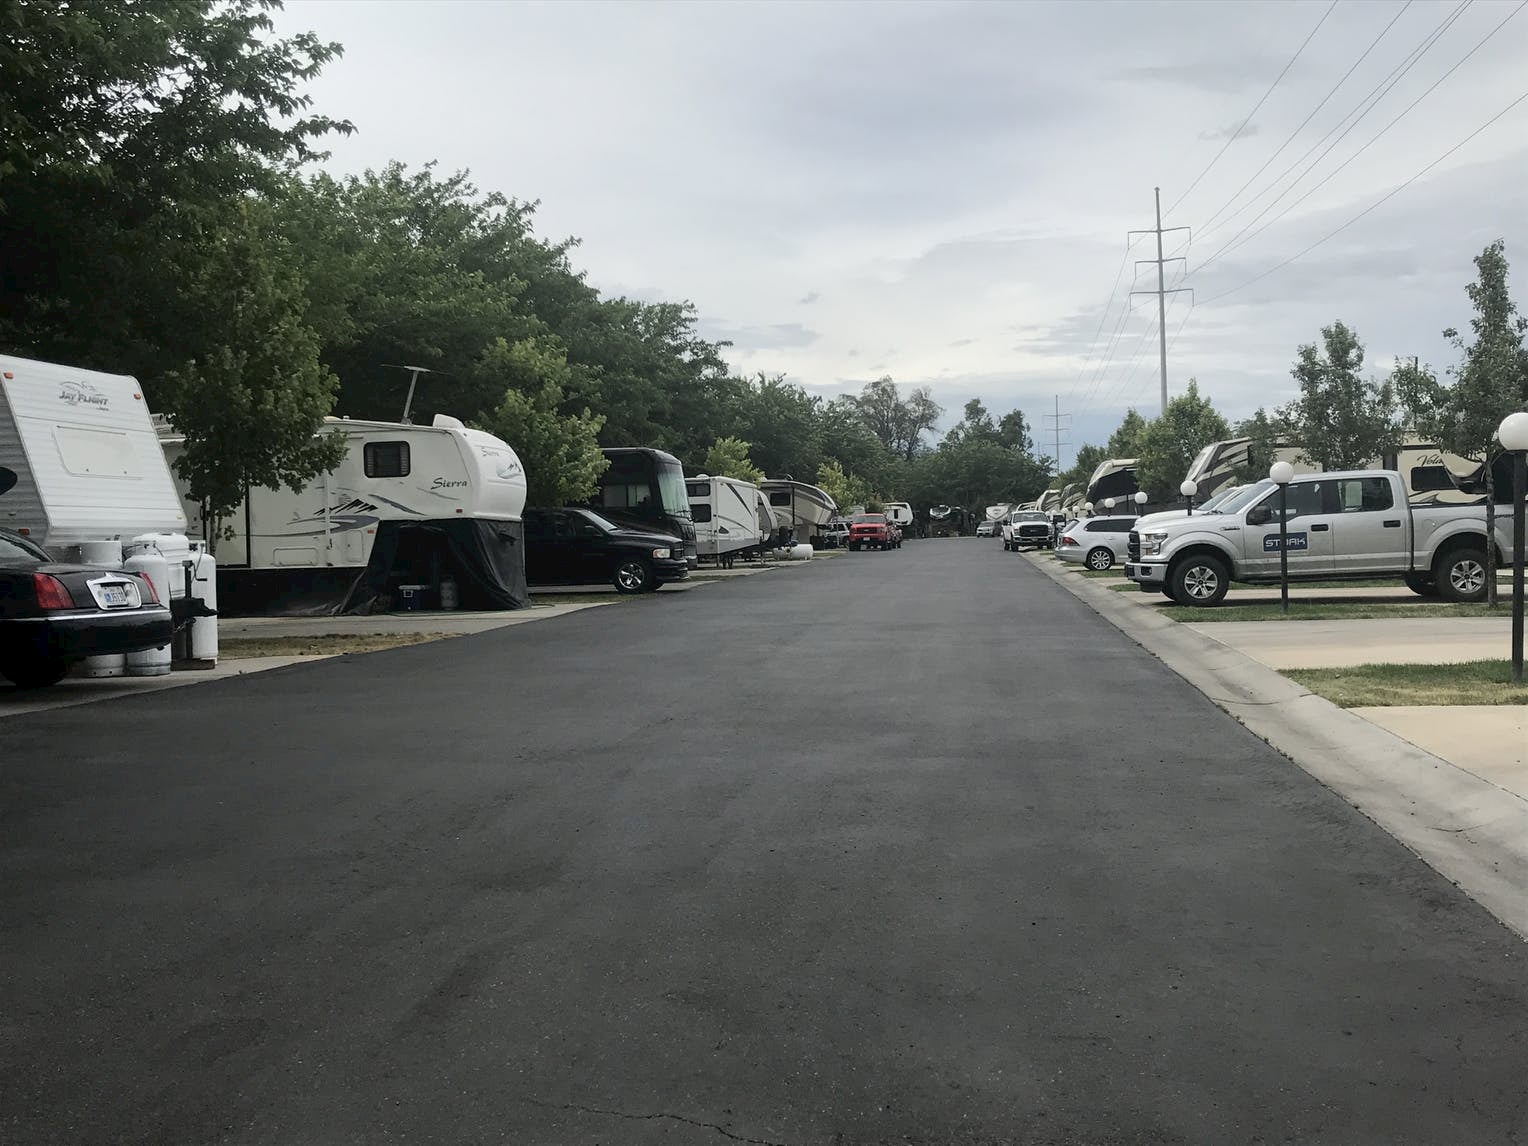 A stretch of road in an RV park lined with RVs and a green lawn.